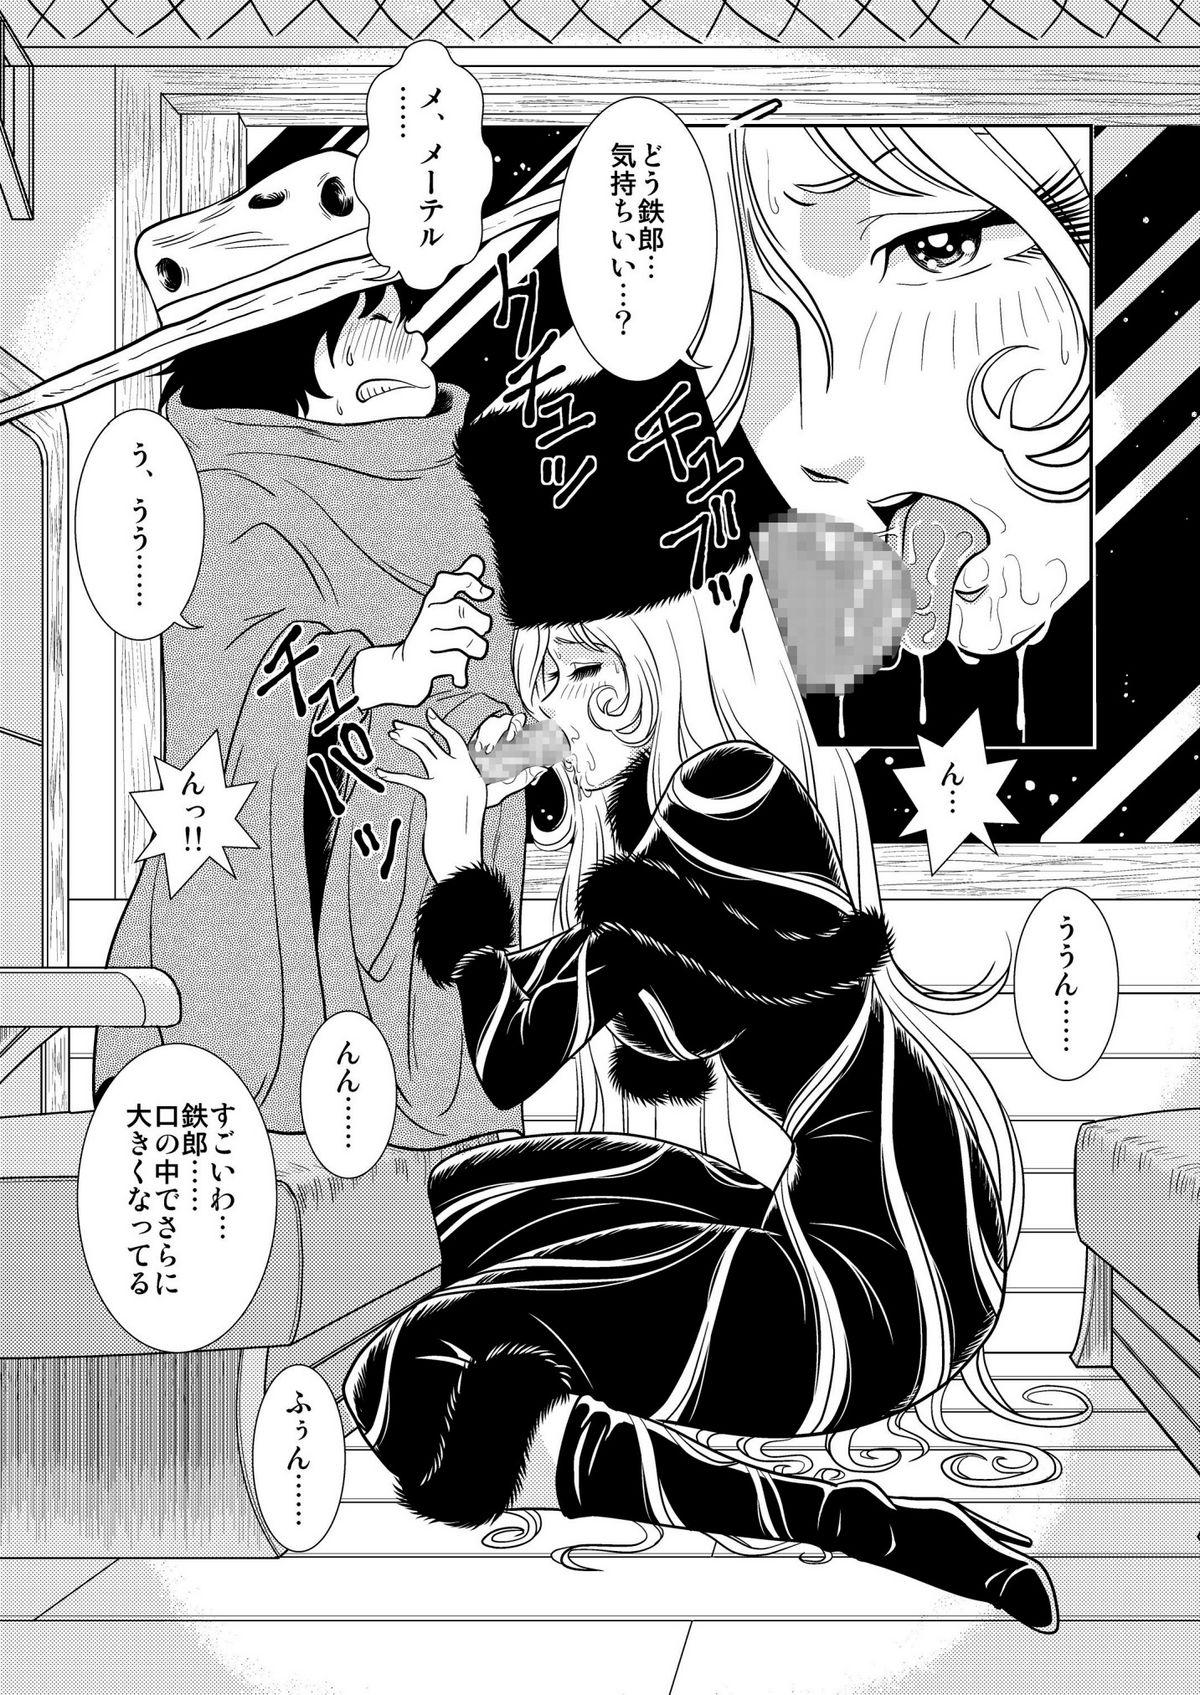 Forwomen Maetel Story 2 - Galaxy express 999 Magrinha - Page 9